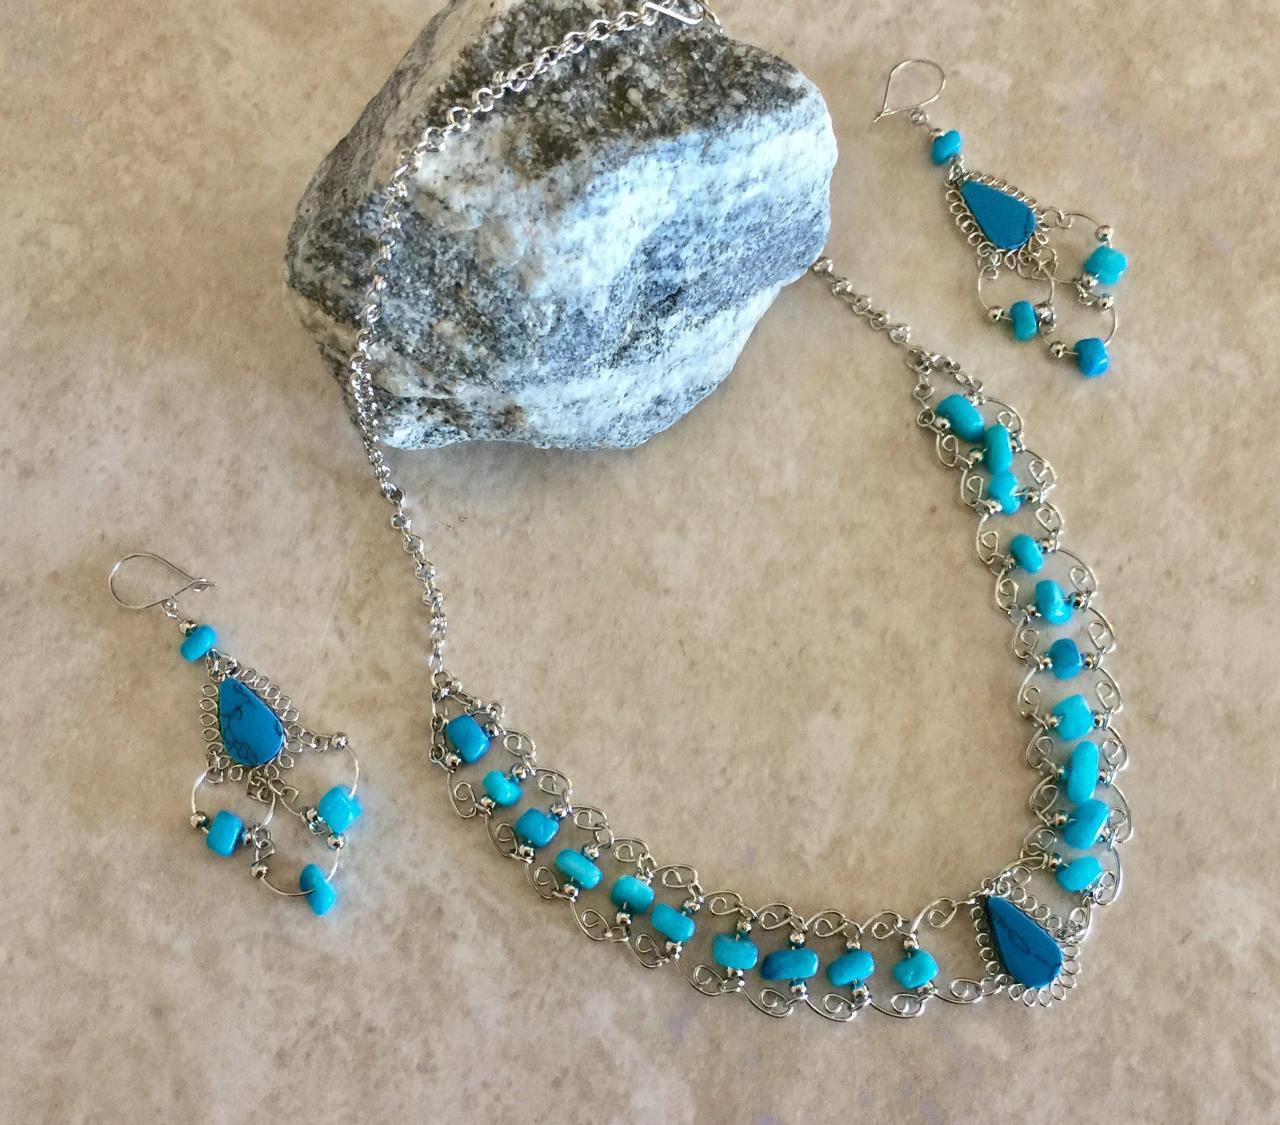 Turquoise Necklace And Earrings, Blue Necklace, Alpaca Silver Necklace, Teardrop Necklace, Blue Nuggets, Handmade Necklace, Lightweight Neck